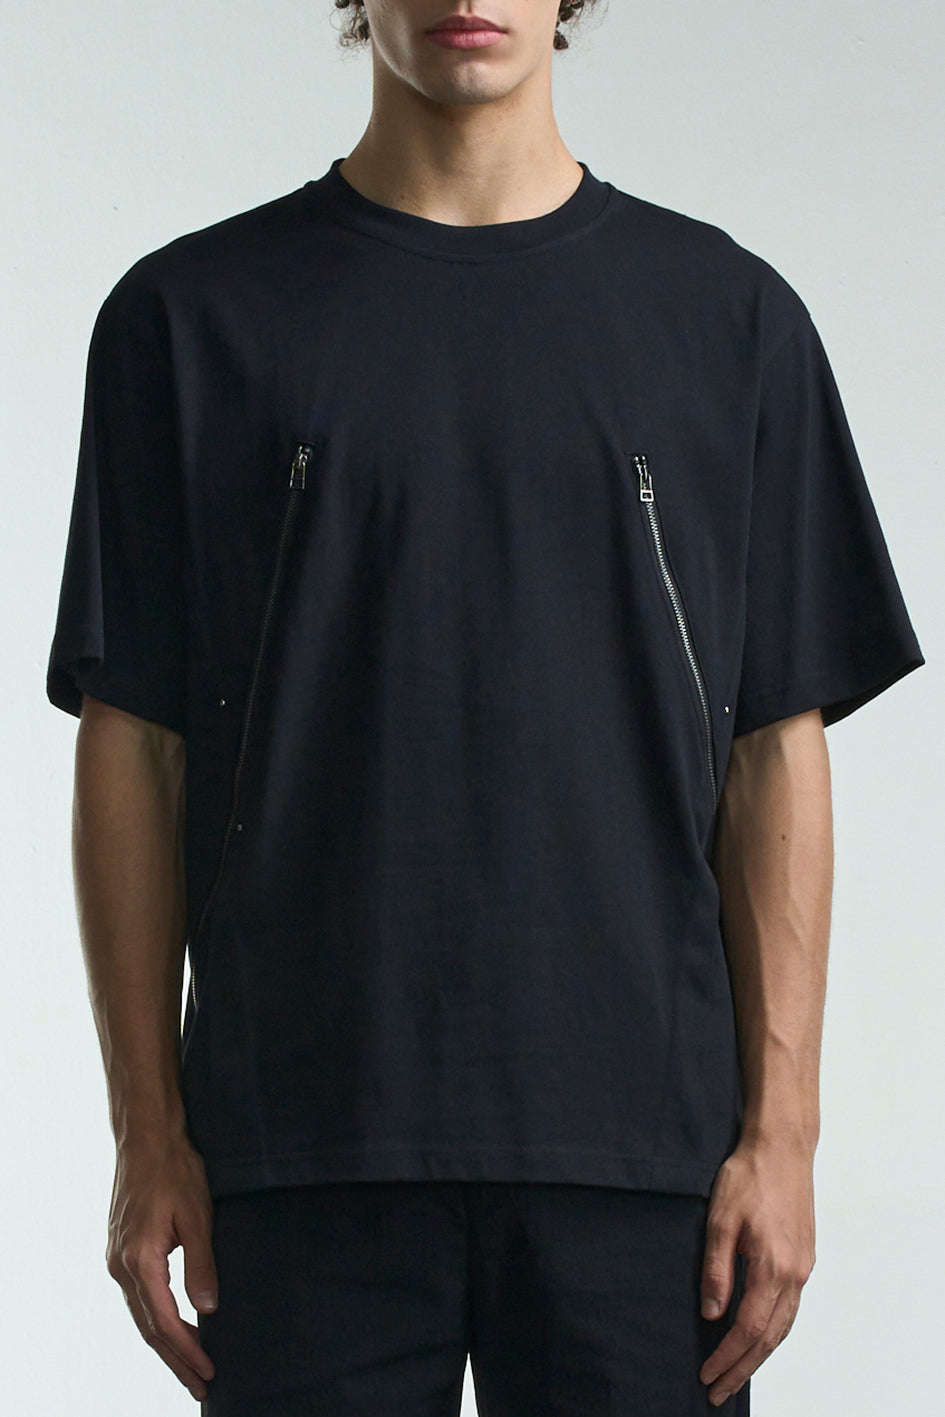 Tee With 2 Zippers And Studs